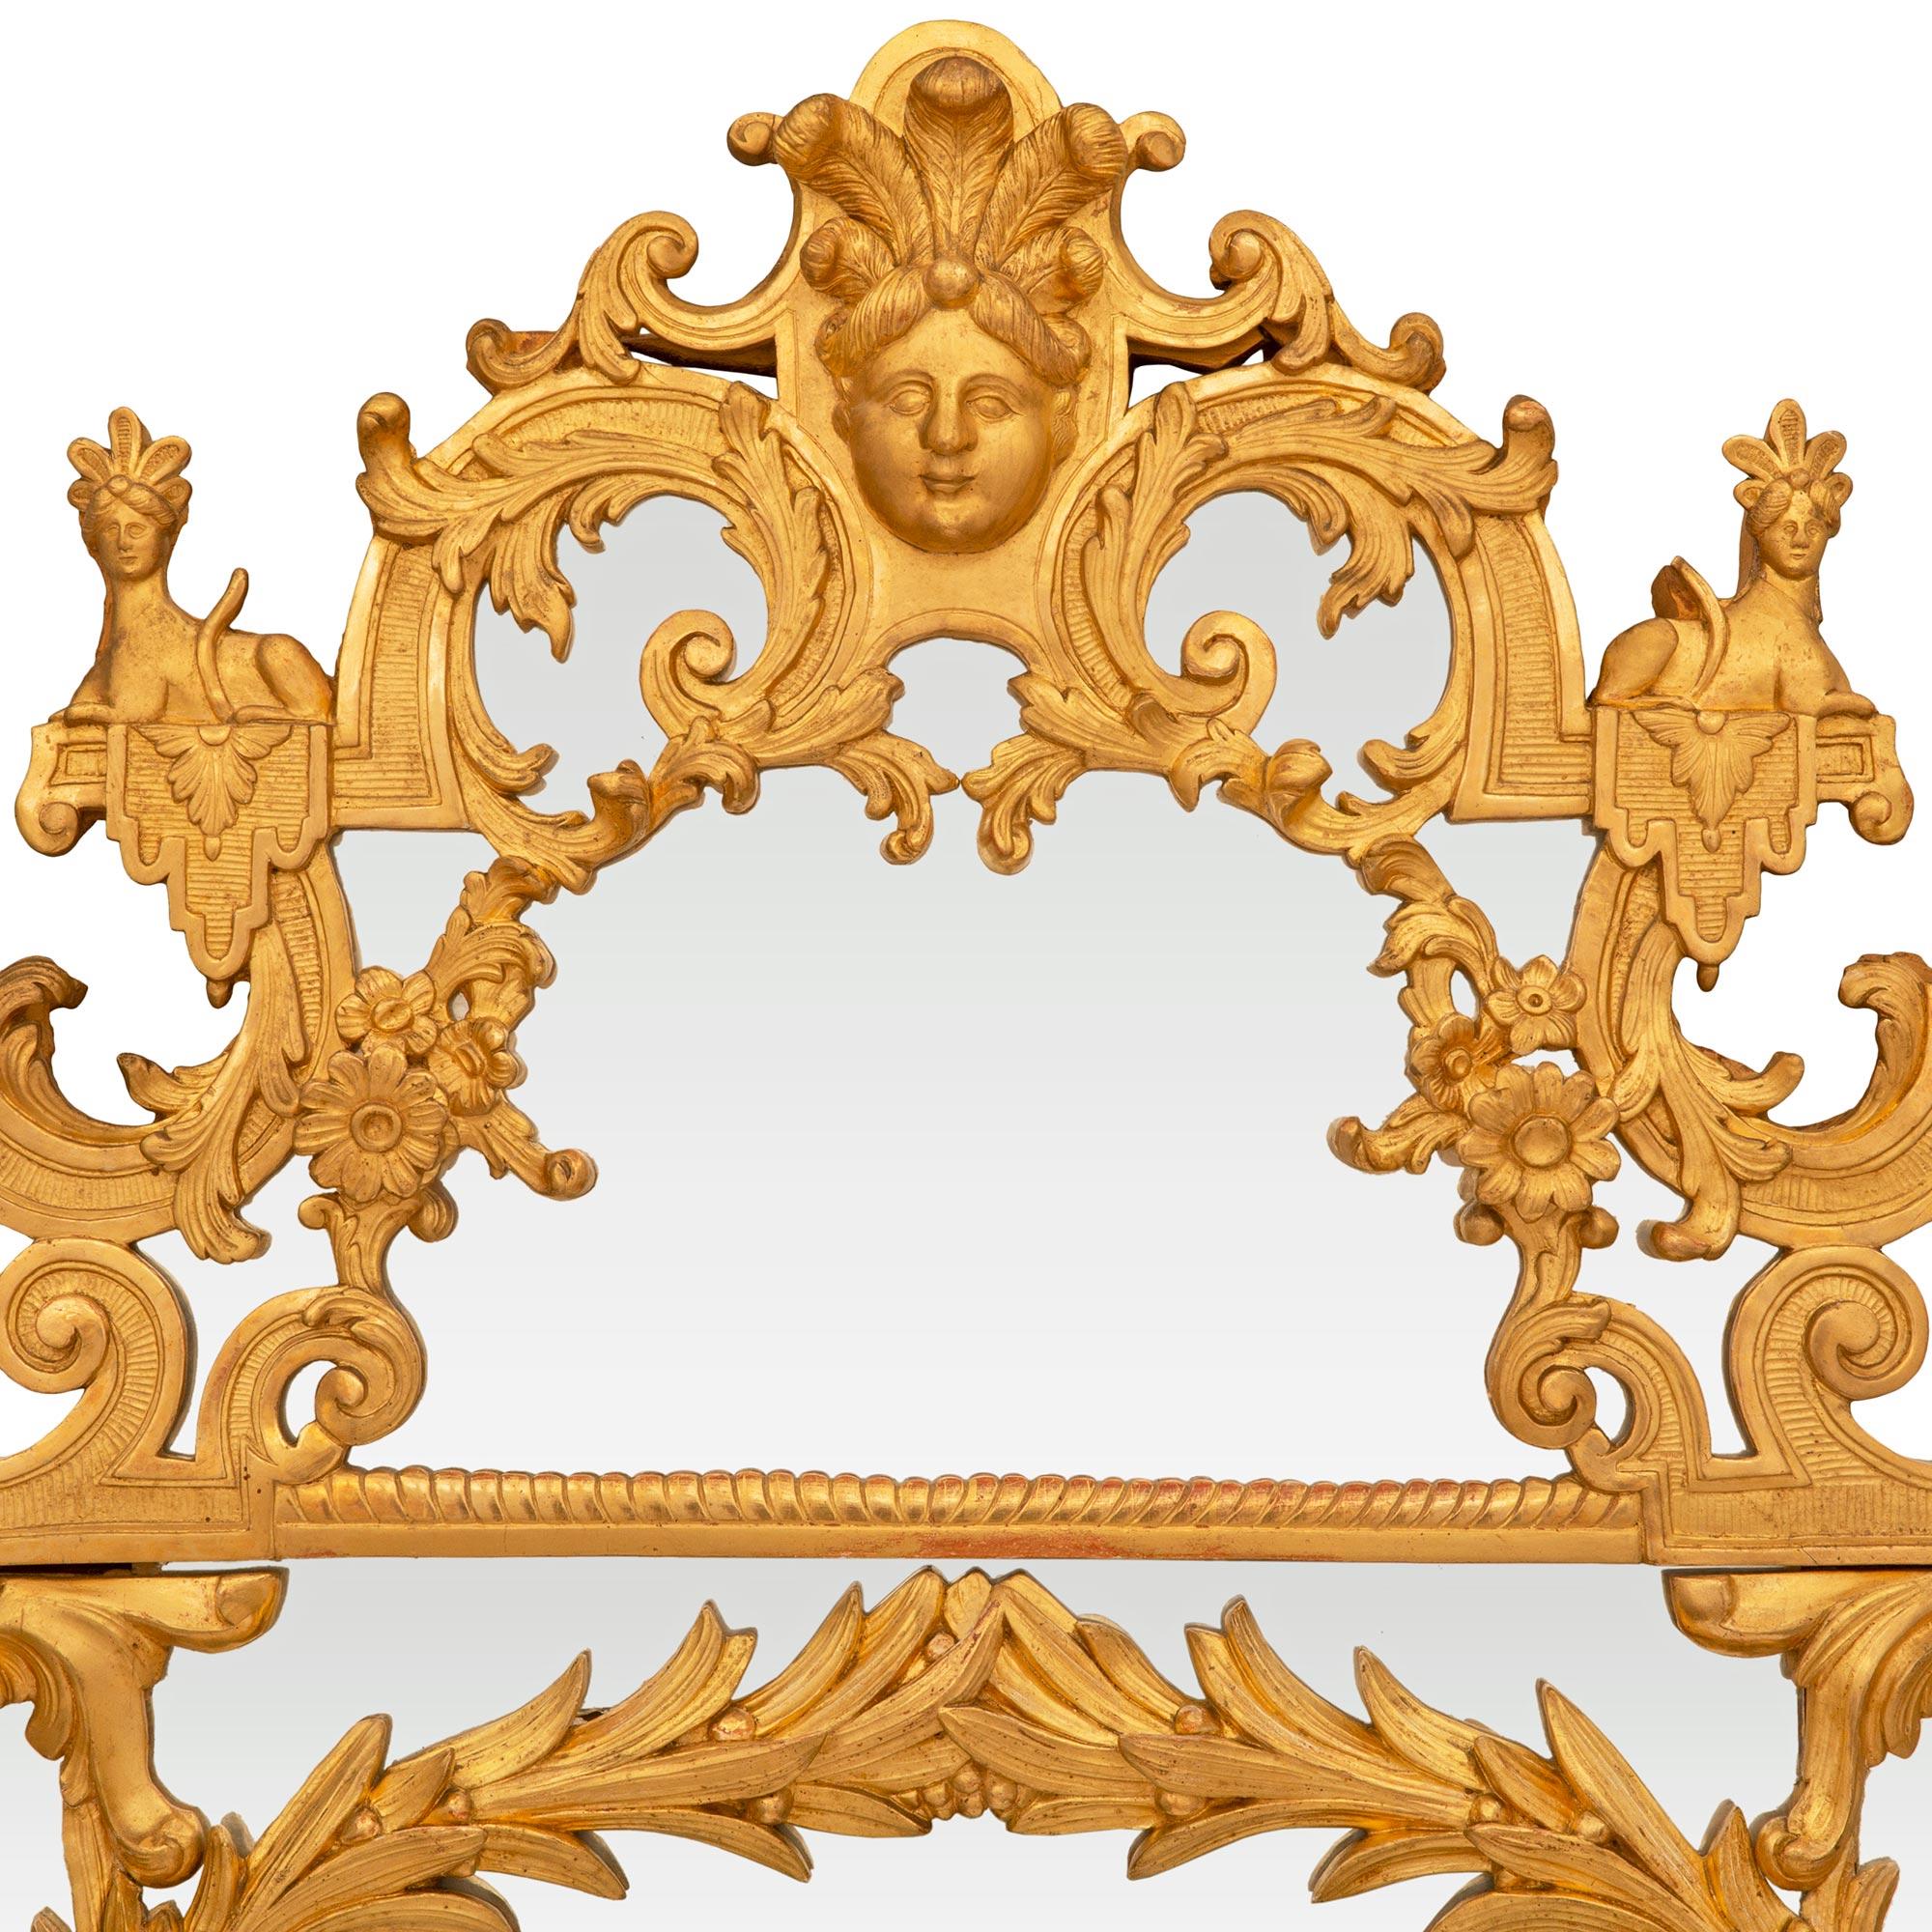 A stunning French 18th century Regency Period giltwood mirror. The double framed mirror is decorated with opulent giltwood scrolls and leaves. At the top are theatrical masks amidst scrolls, garlands and foliate with a large central mask at the top